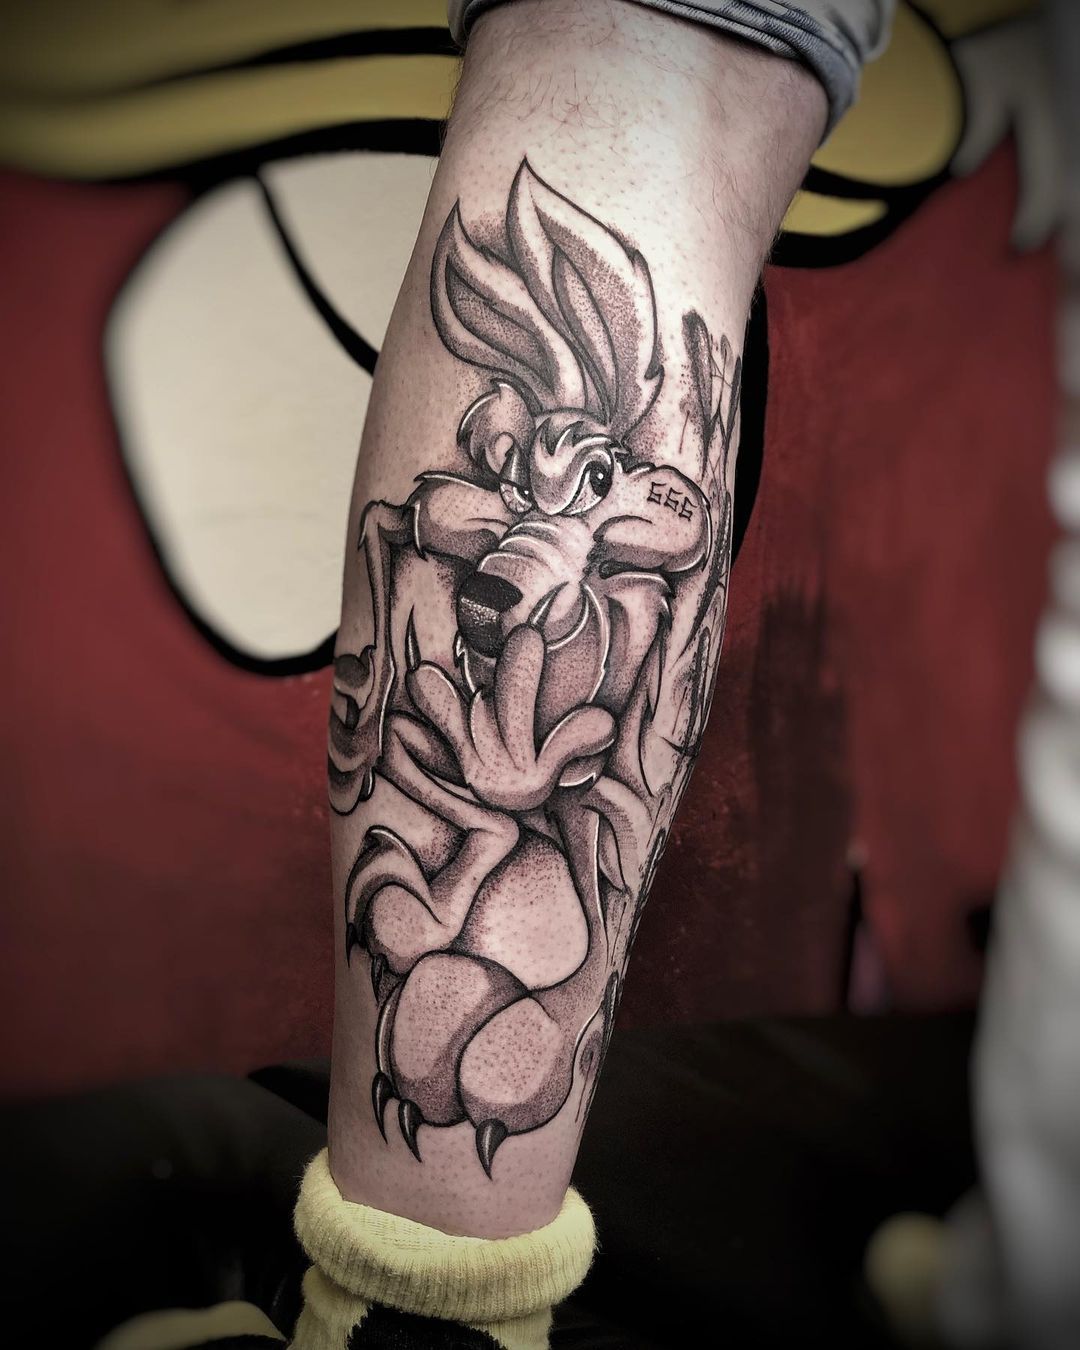 WileECoyote Finaly got his hand on the Roadrunner By Tony Gamelin at  Rising King Tattoo In Sorel Quebec  rtattoo